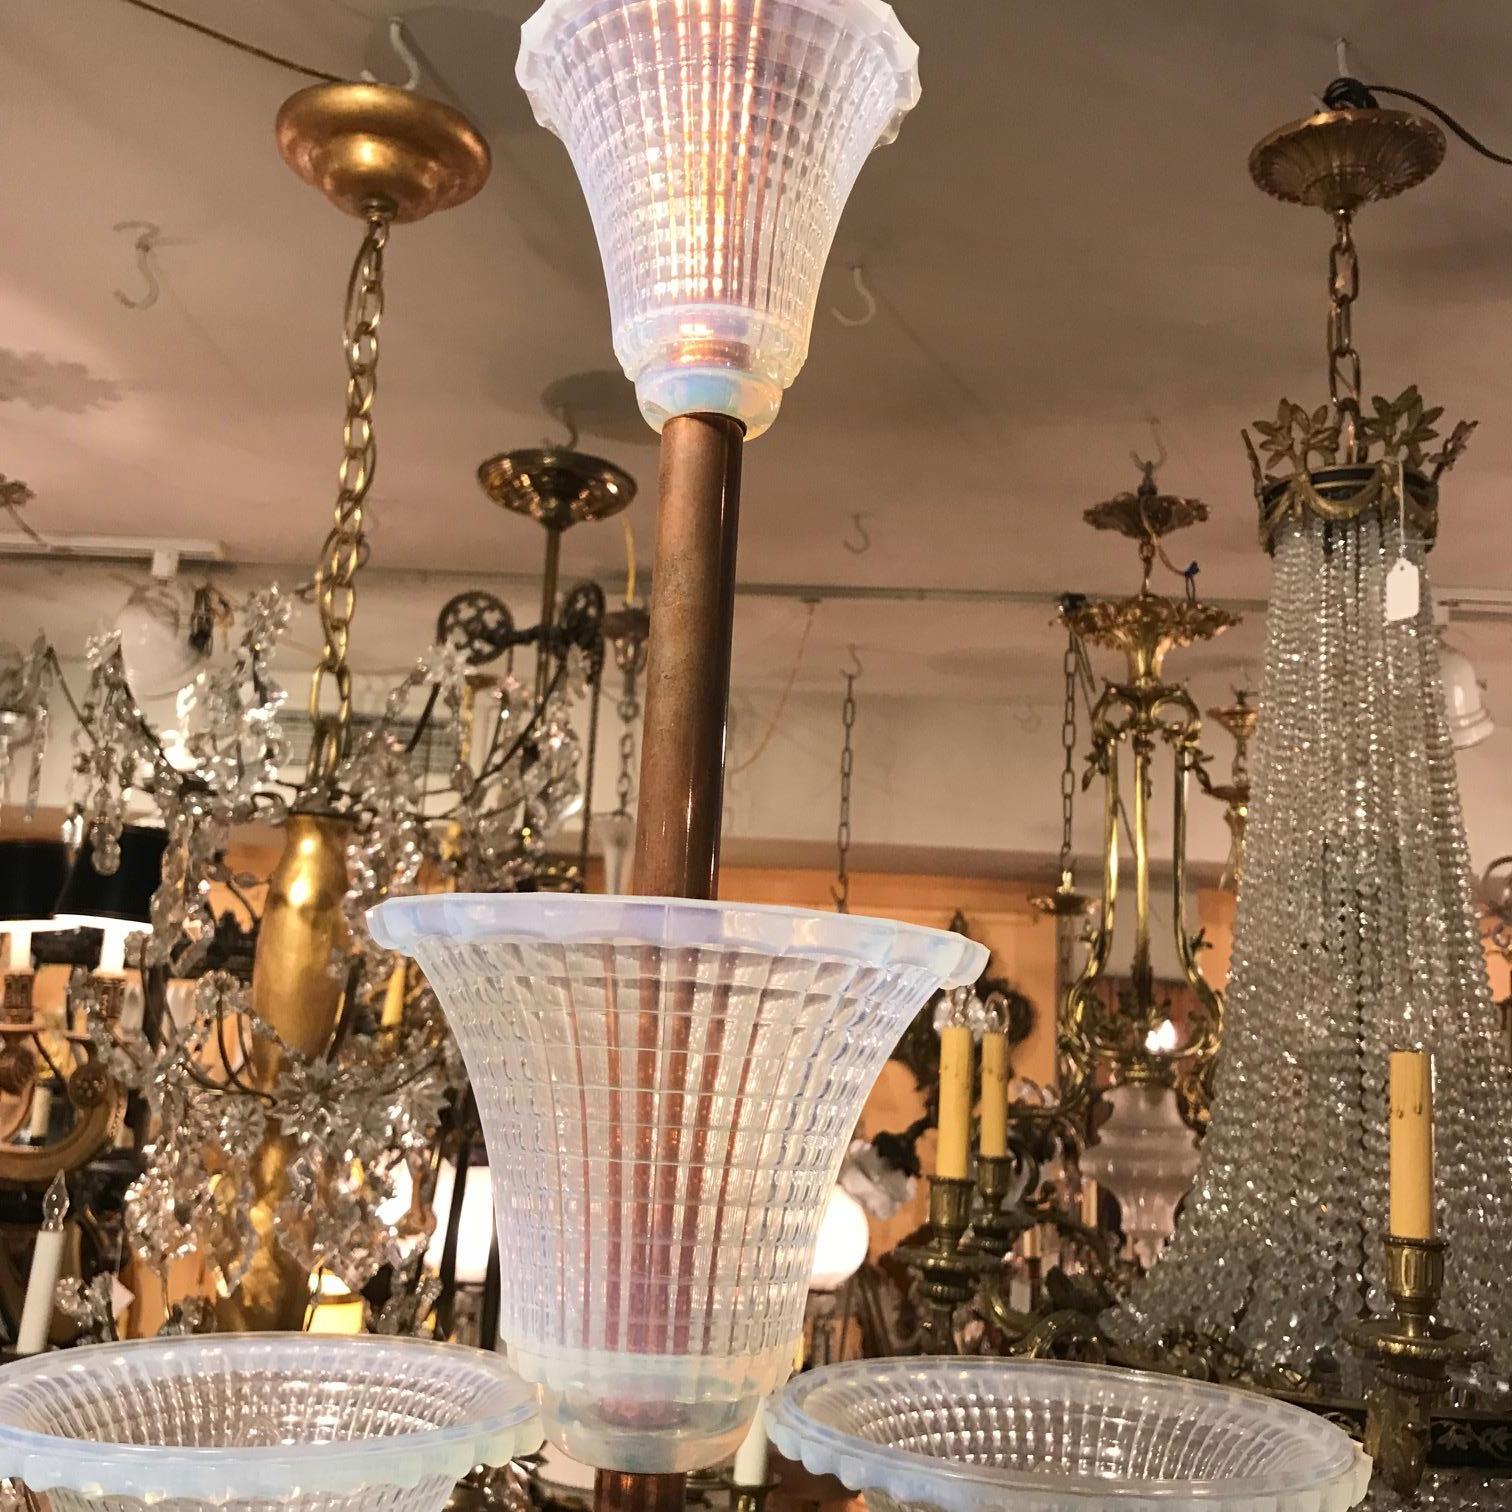 Mid-20th Century Art Deco Eight-Light Opalescent Glass and Copper mounted chandelier